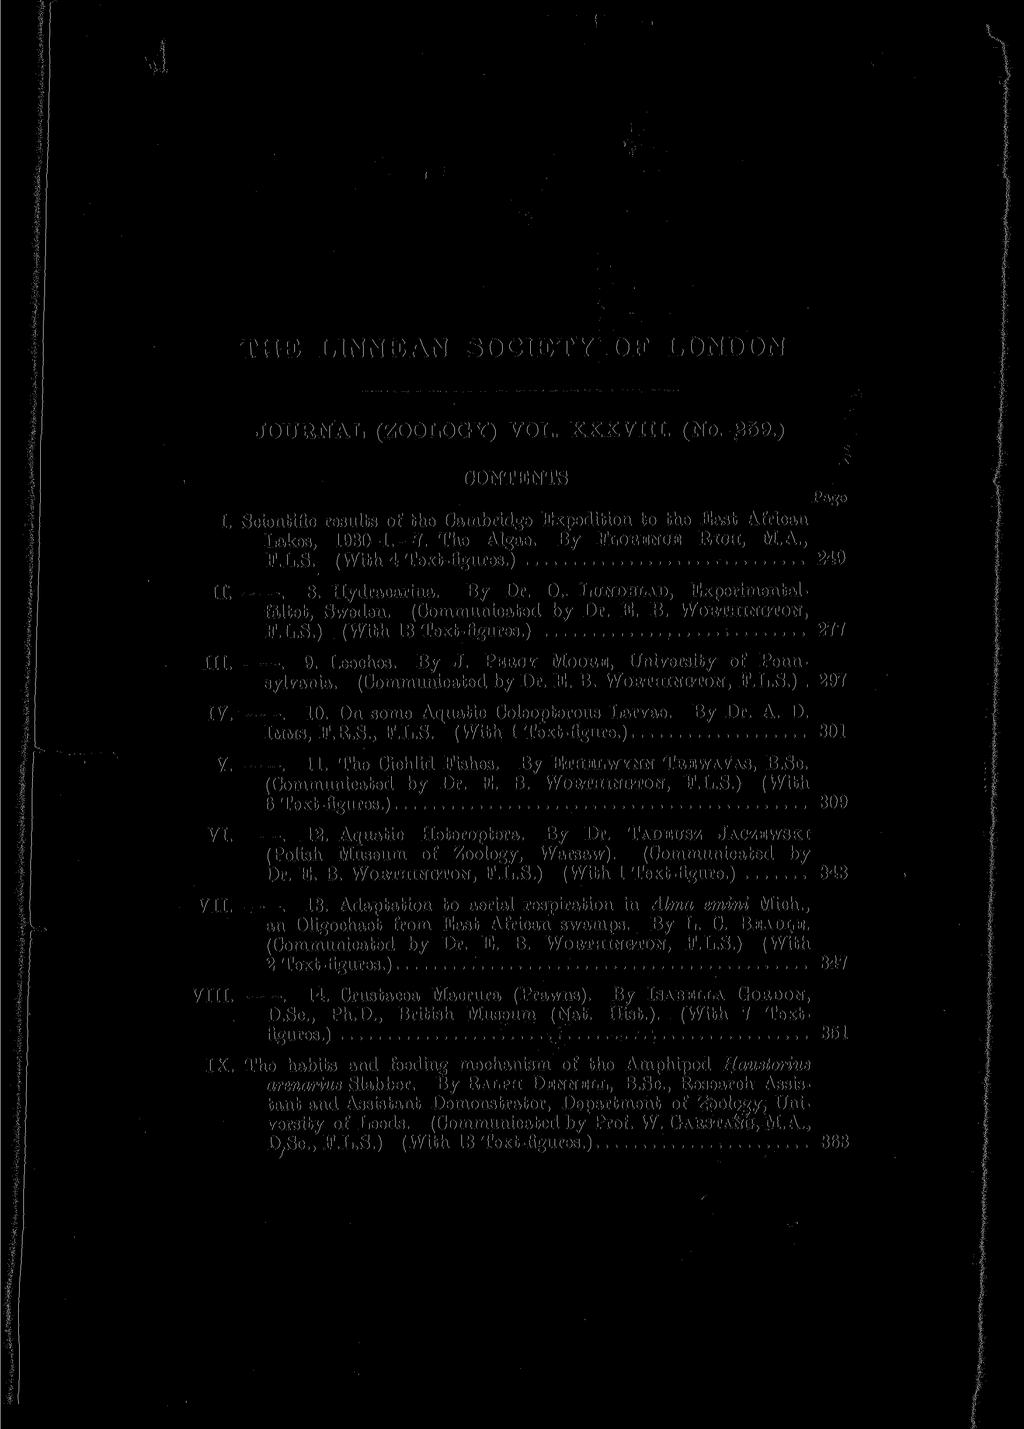 THE LINNEAN SOCIETY OF LONDON JOURNAL (ZOOLOGY) VOL. XXXVIII. (No. 259.) CONTENTS Page I. Scientific results of the Cambridge Expedition to the East African Lakes, 1930-1. 7. The Algae.